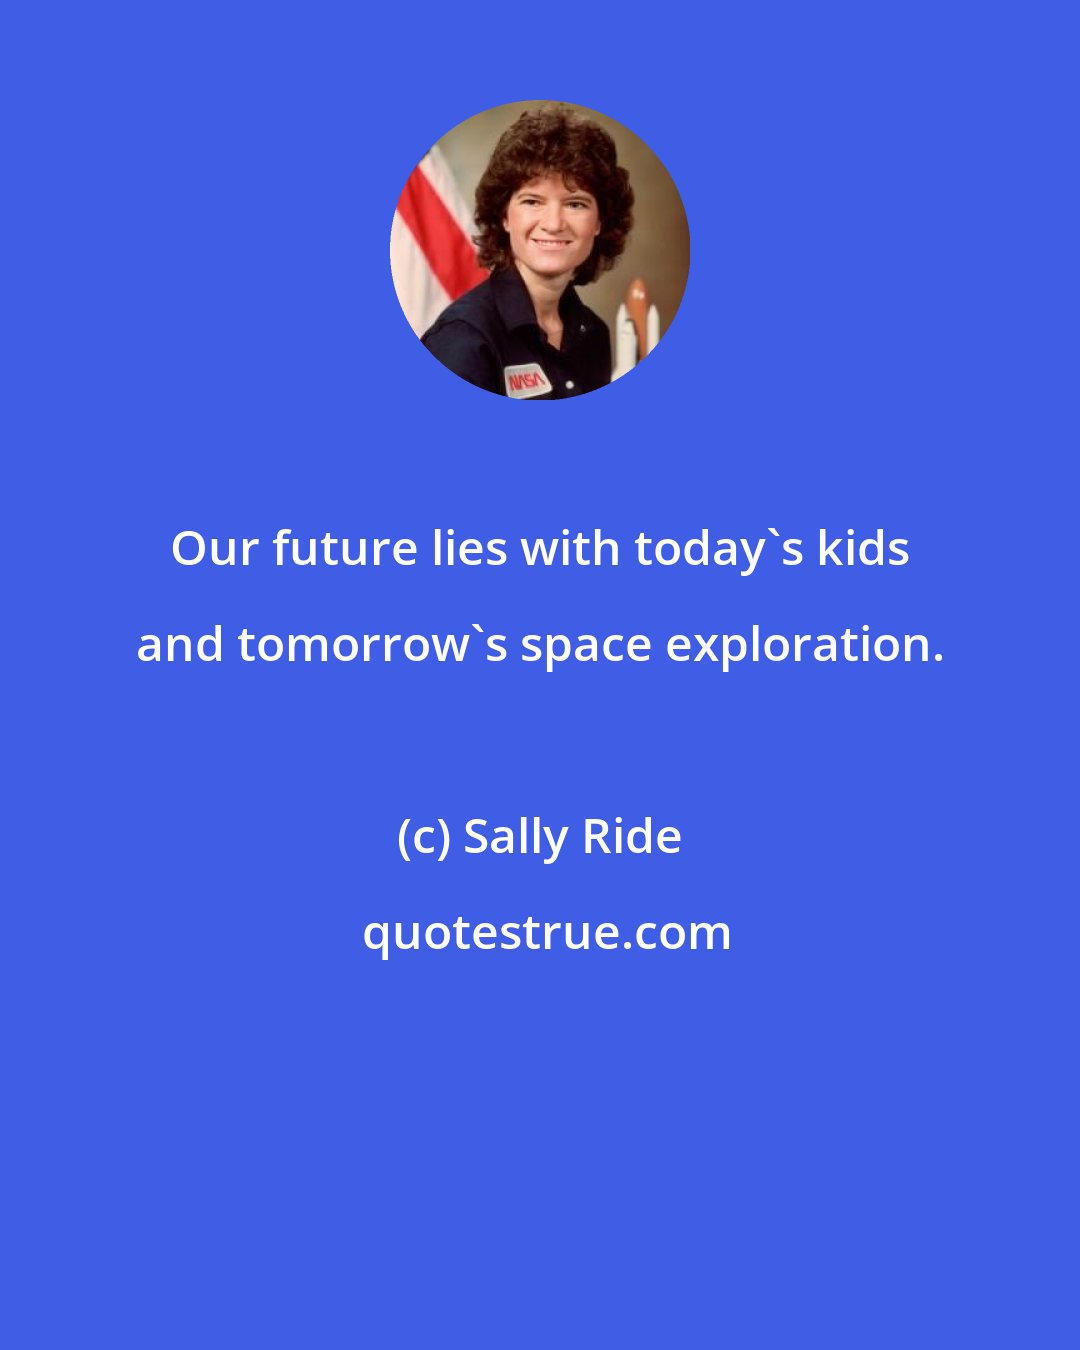 Sally Ride: Our future lies with today's kids and tomorrow's space exploration.